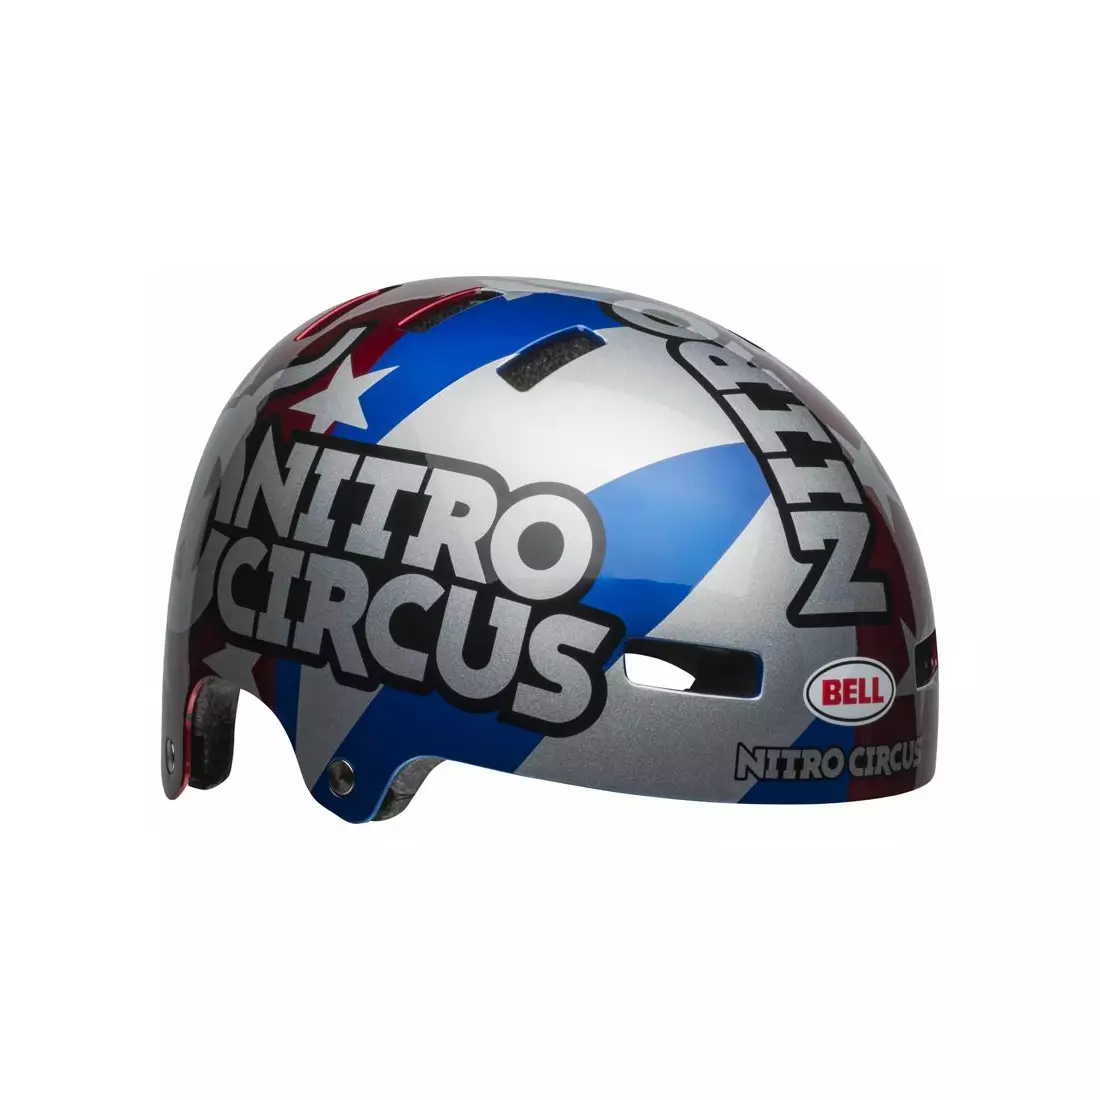 BELL LOCAL kask bmx nitro circus gloss silver blue red 